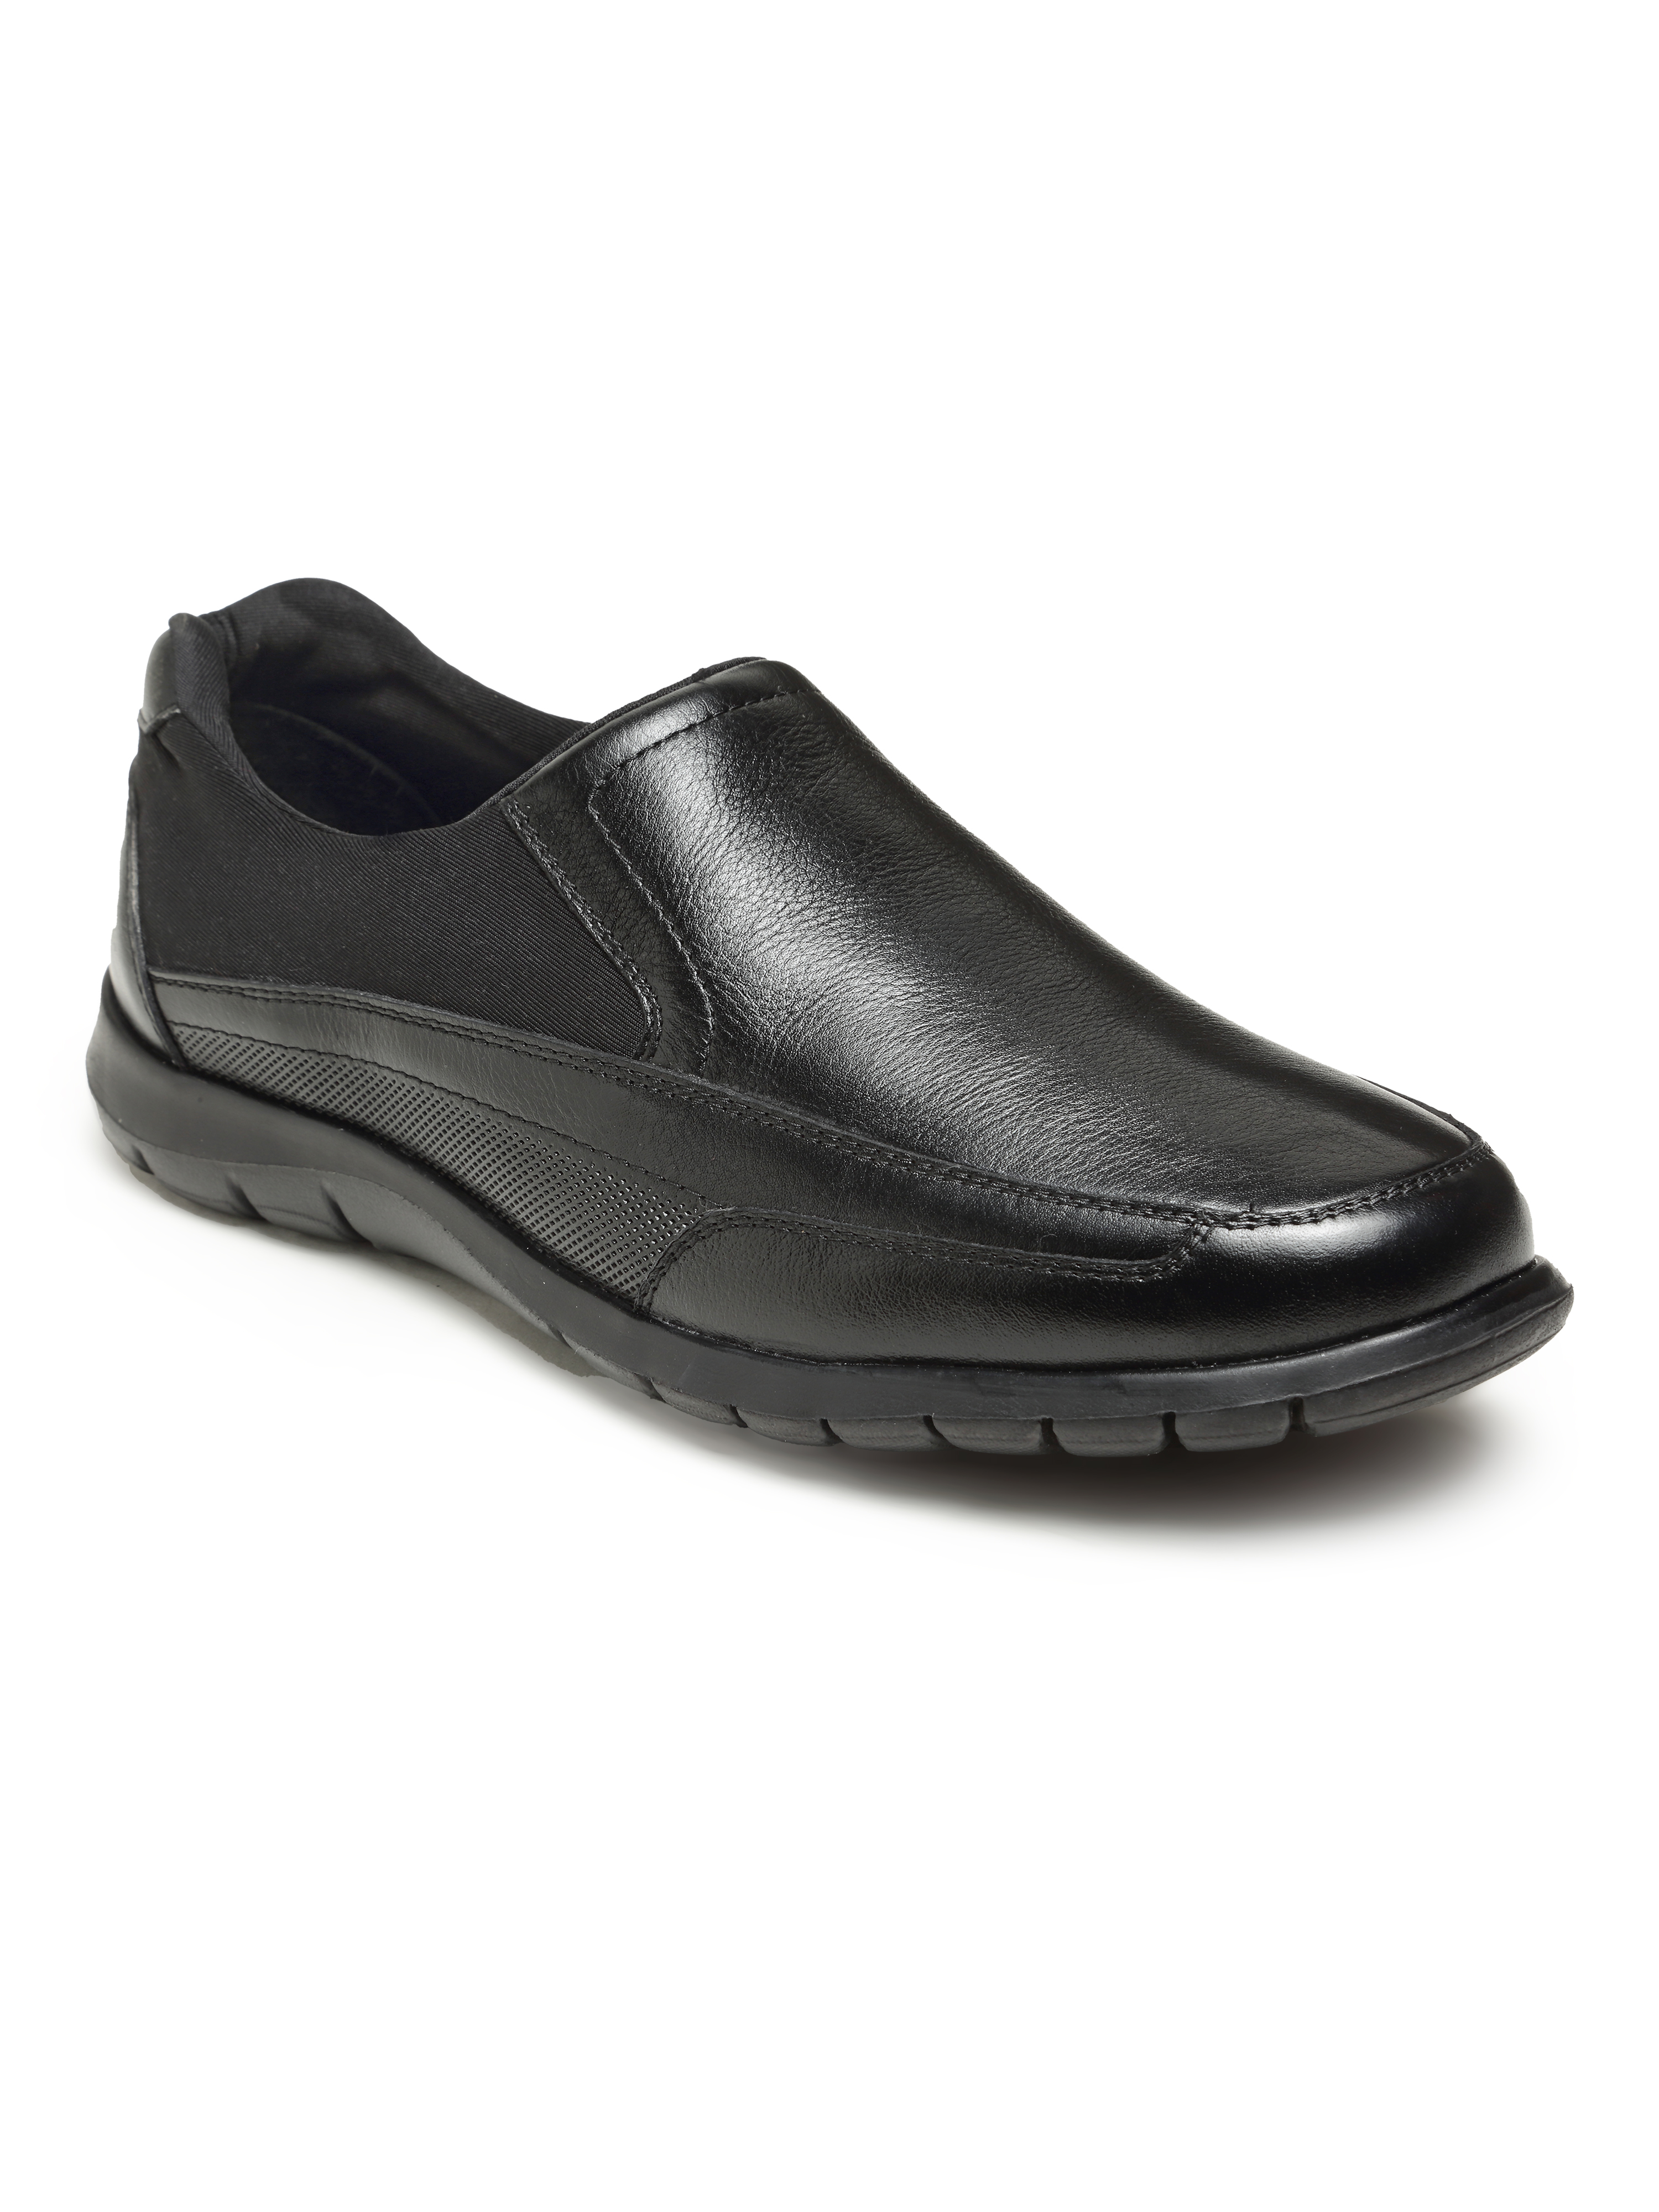 VON WELLX IGOR BLACK SHOES(SPECIALLY FOR DIABETIC FOOT)